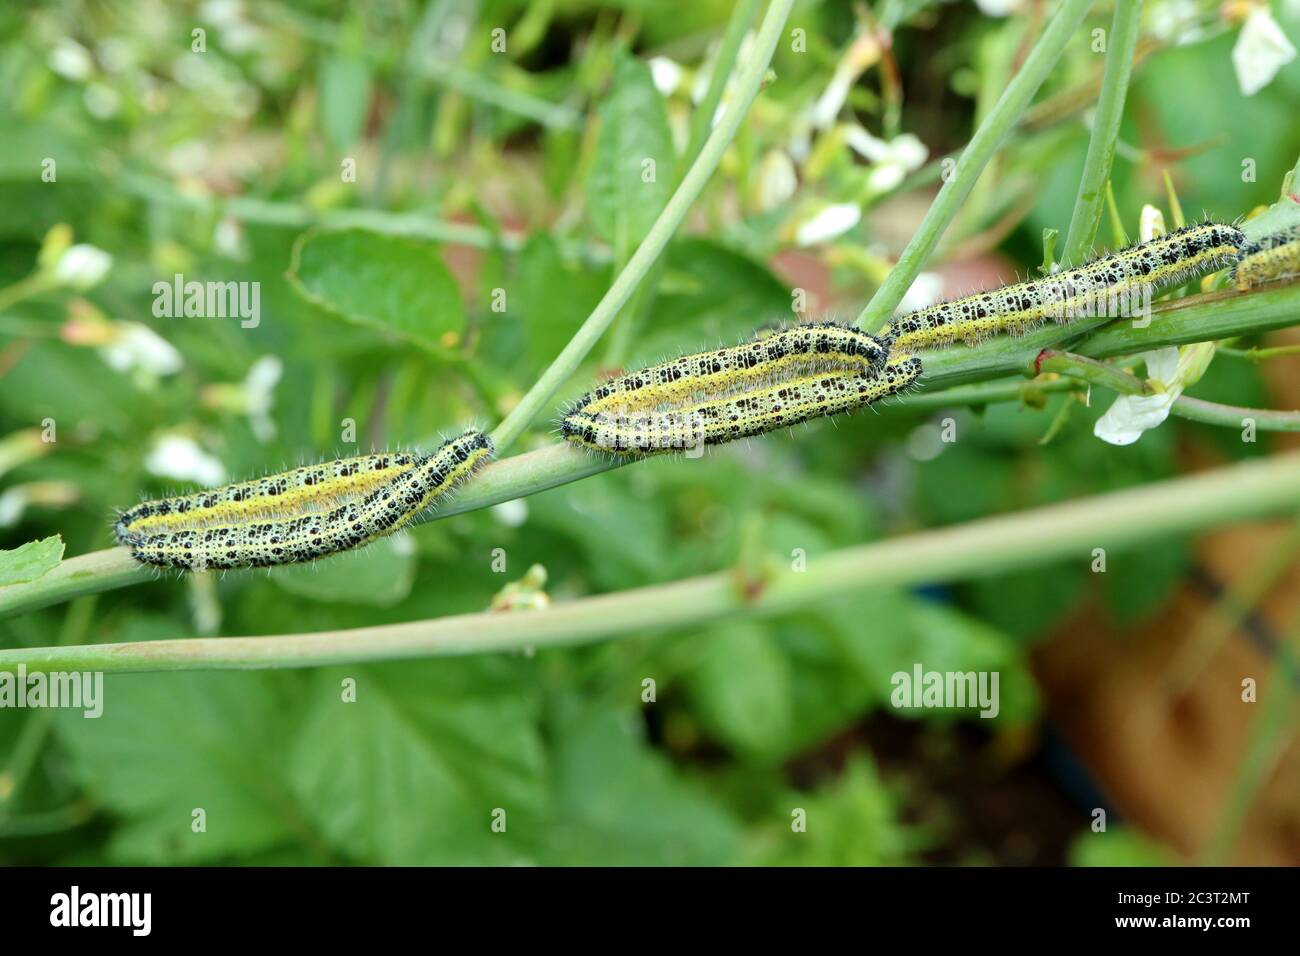 Large white butterfly pieris brassicae caterpillar infestation eating their way through vegetable plant in garden in the uk Stock Photo